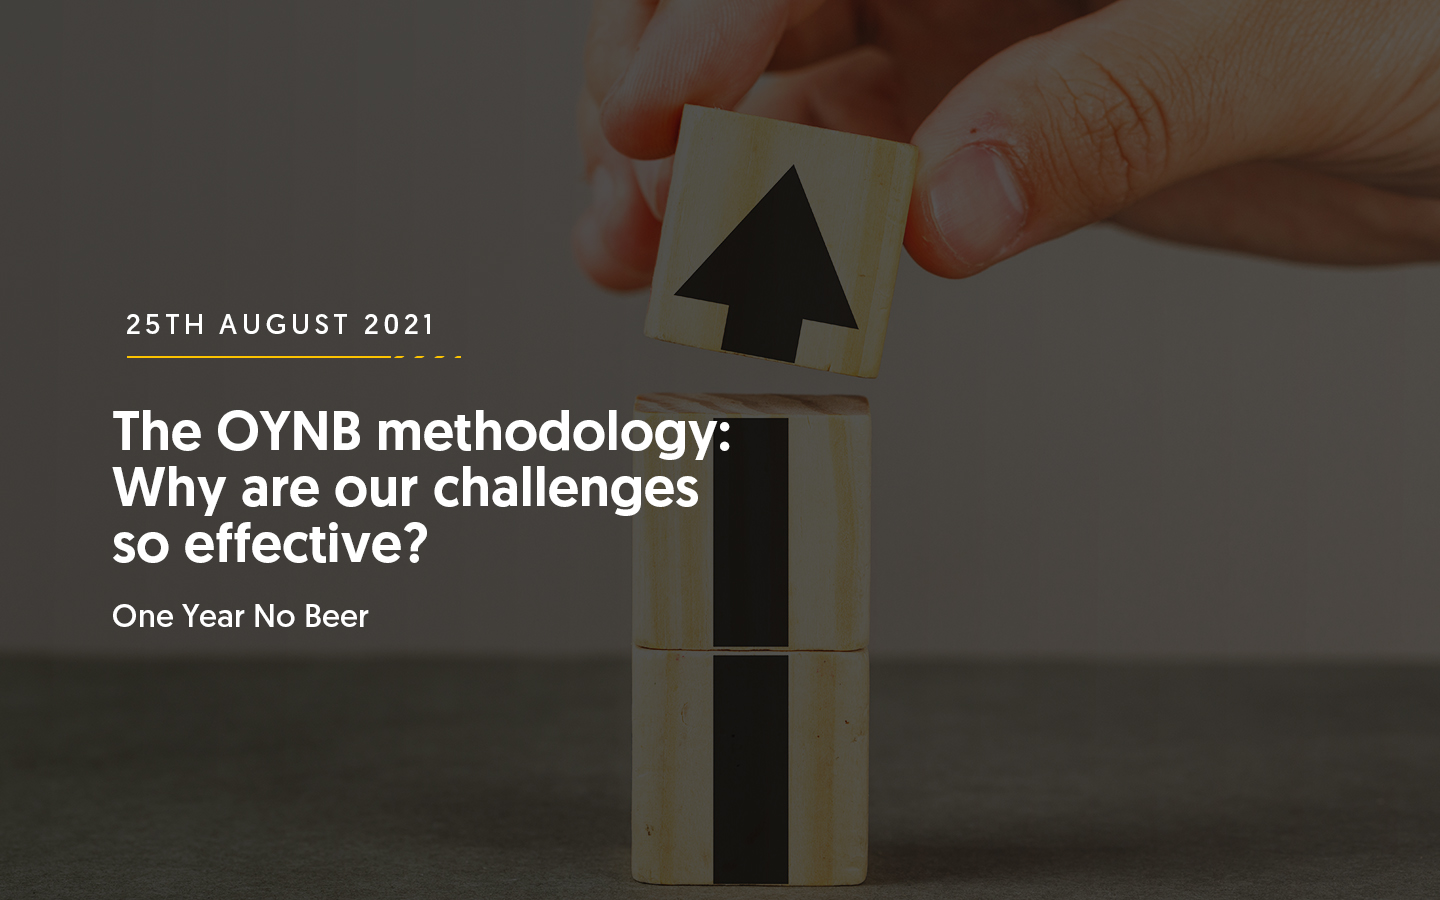 The OYNB methodology: Why are our challenges so effective?